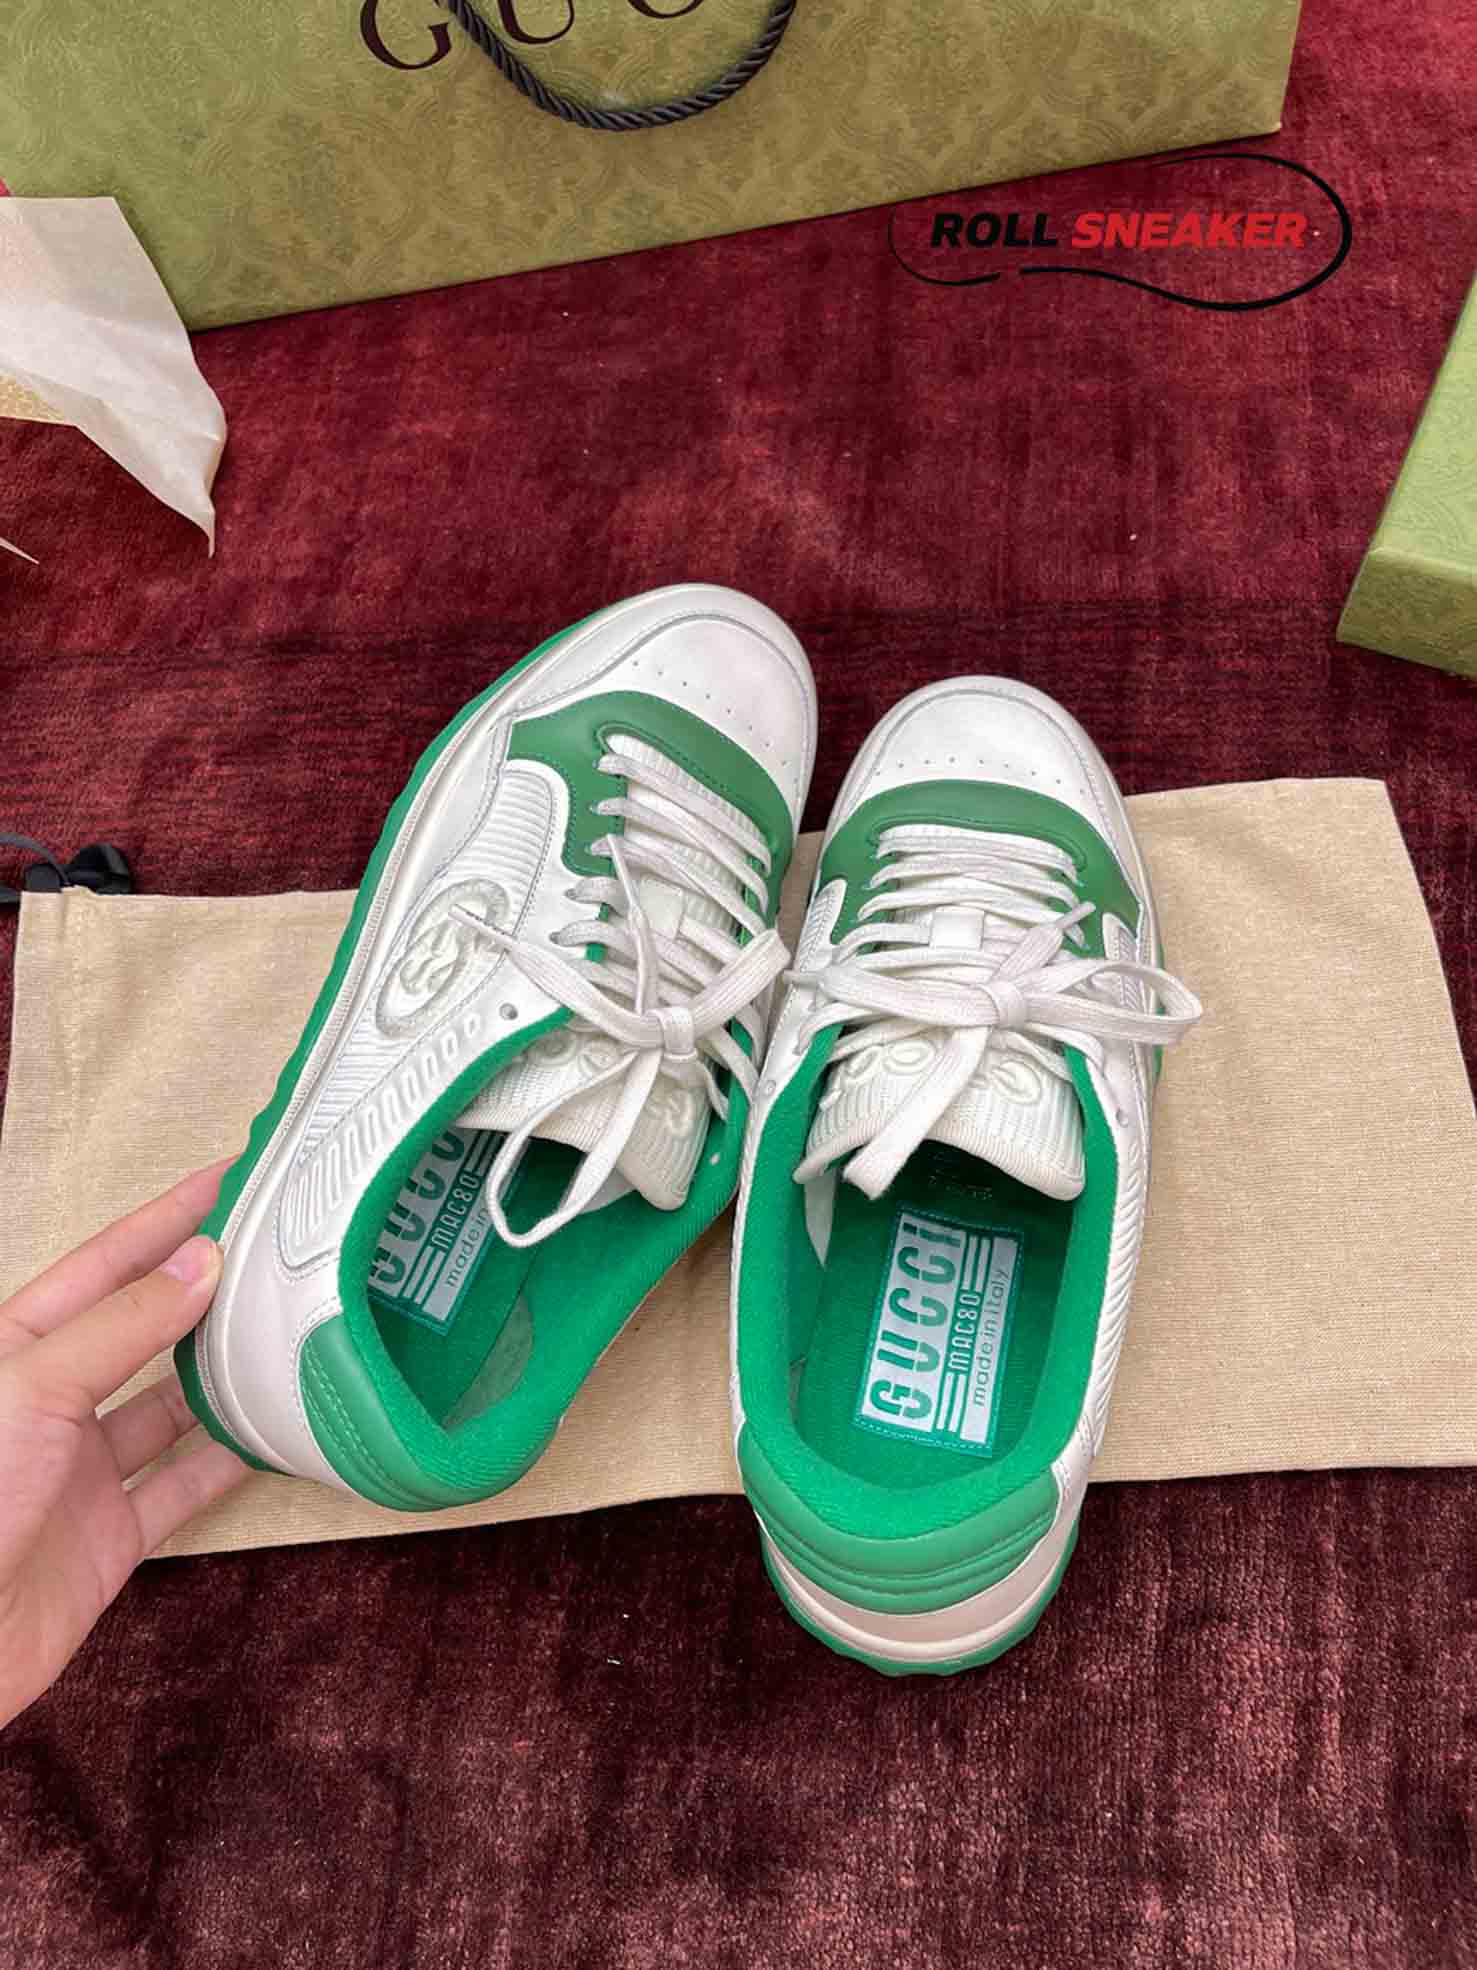 Gucci MAC80 Sneaker Off White and Green
